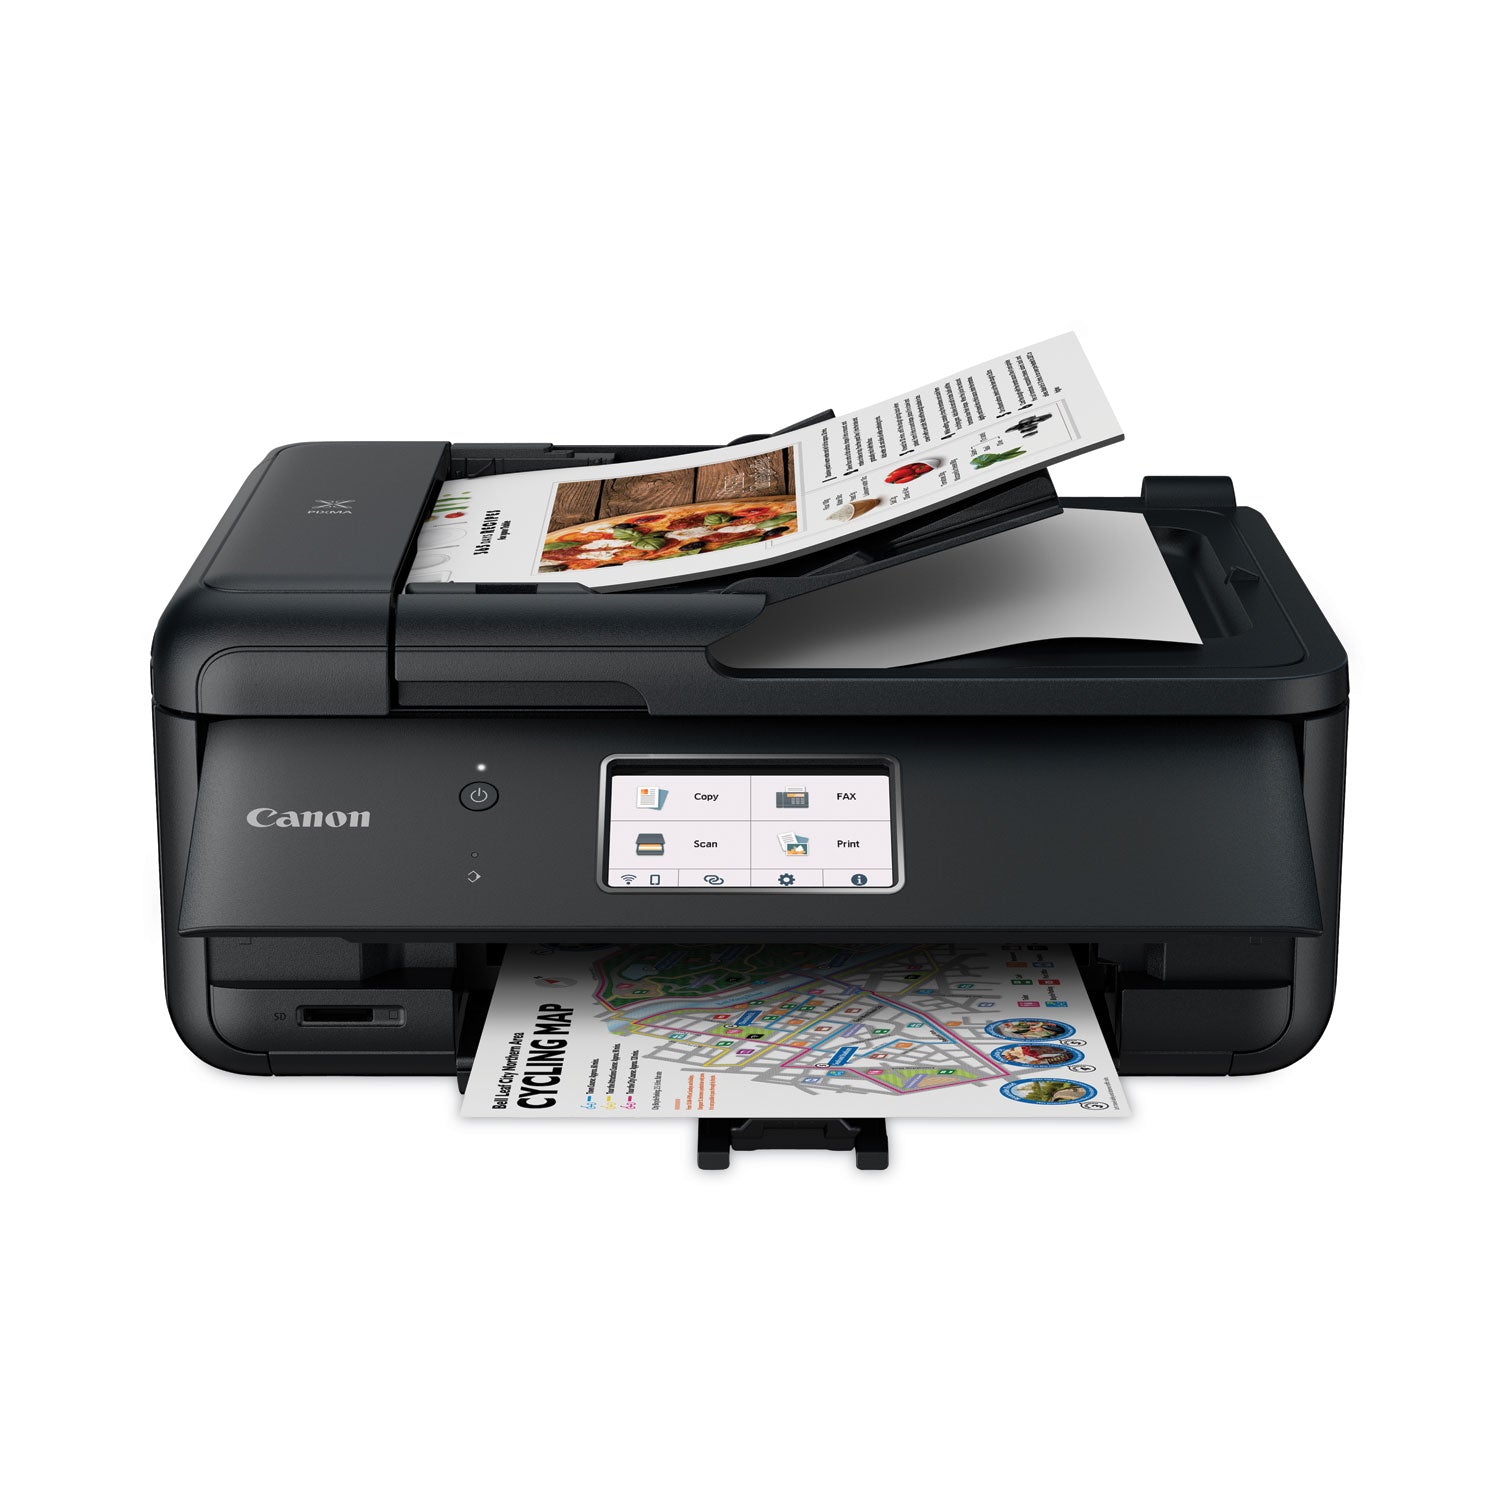 pixma-tr8620a-all-in-one-inkjet-printer-copy-fax-print-scan_cnm4451c032 - 2